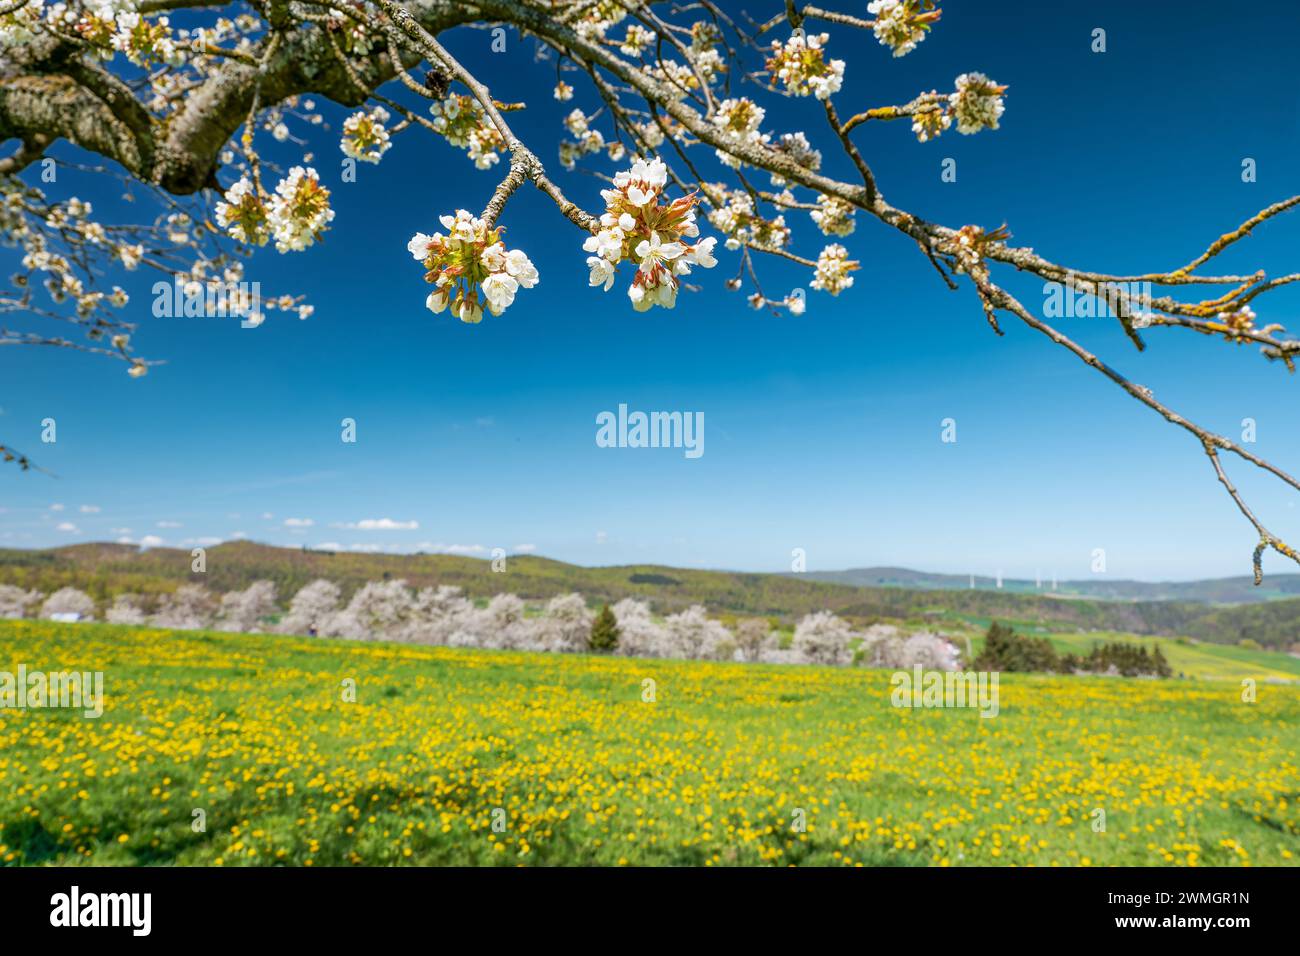 Close-up of a blossoming cherry tree branch with flowering cherry trees, dandelion meadow and blue sky in the background Stock Photo